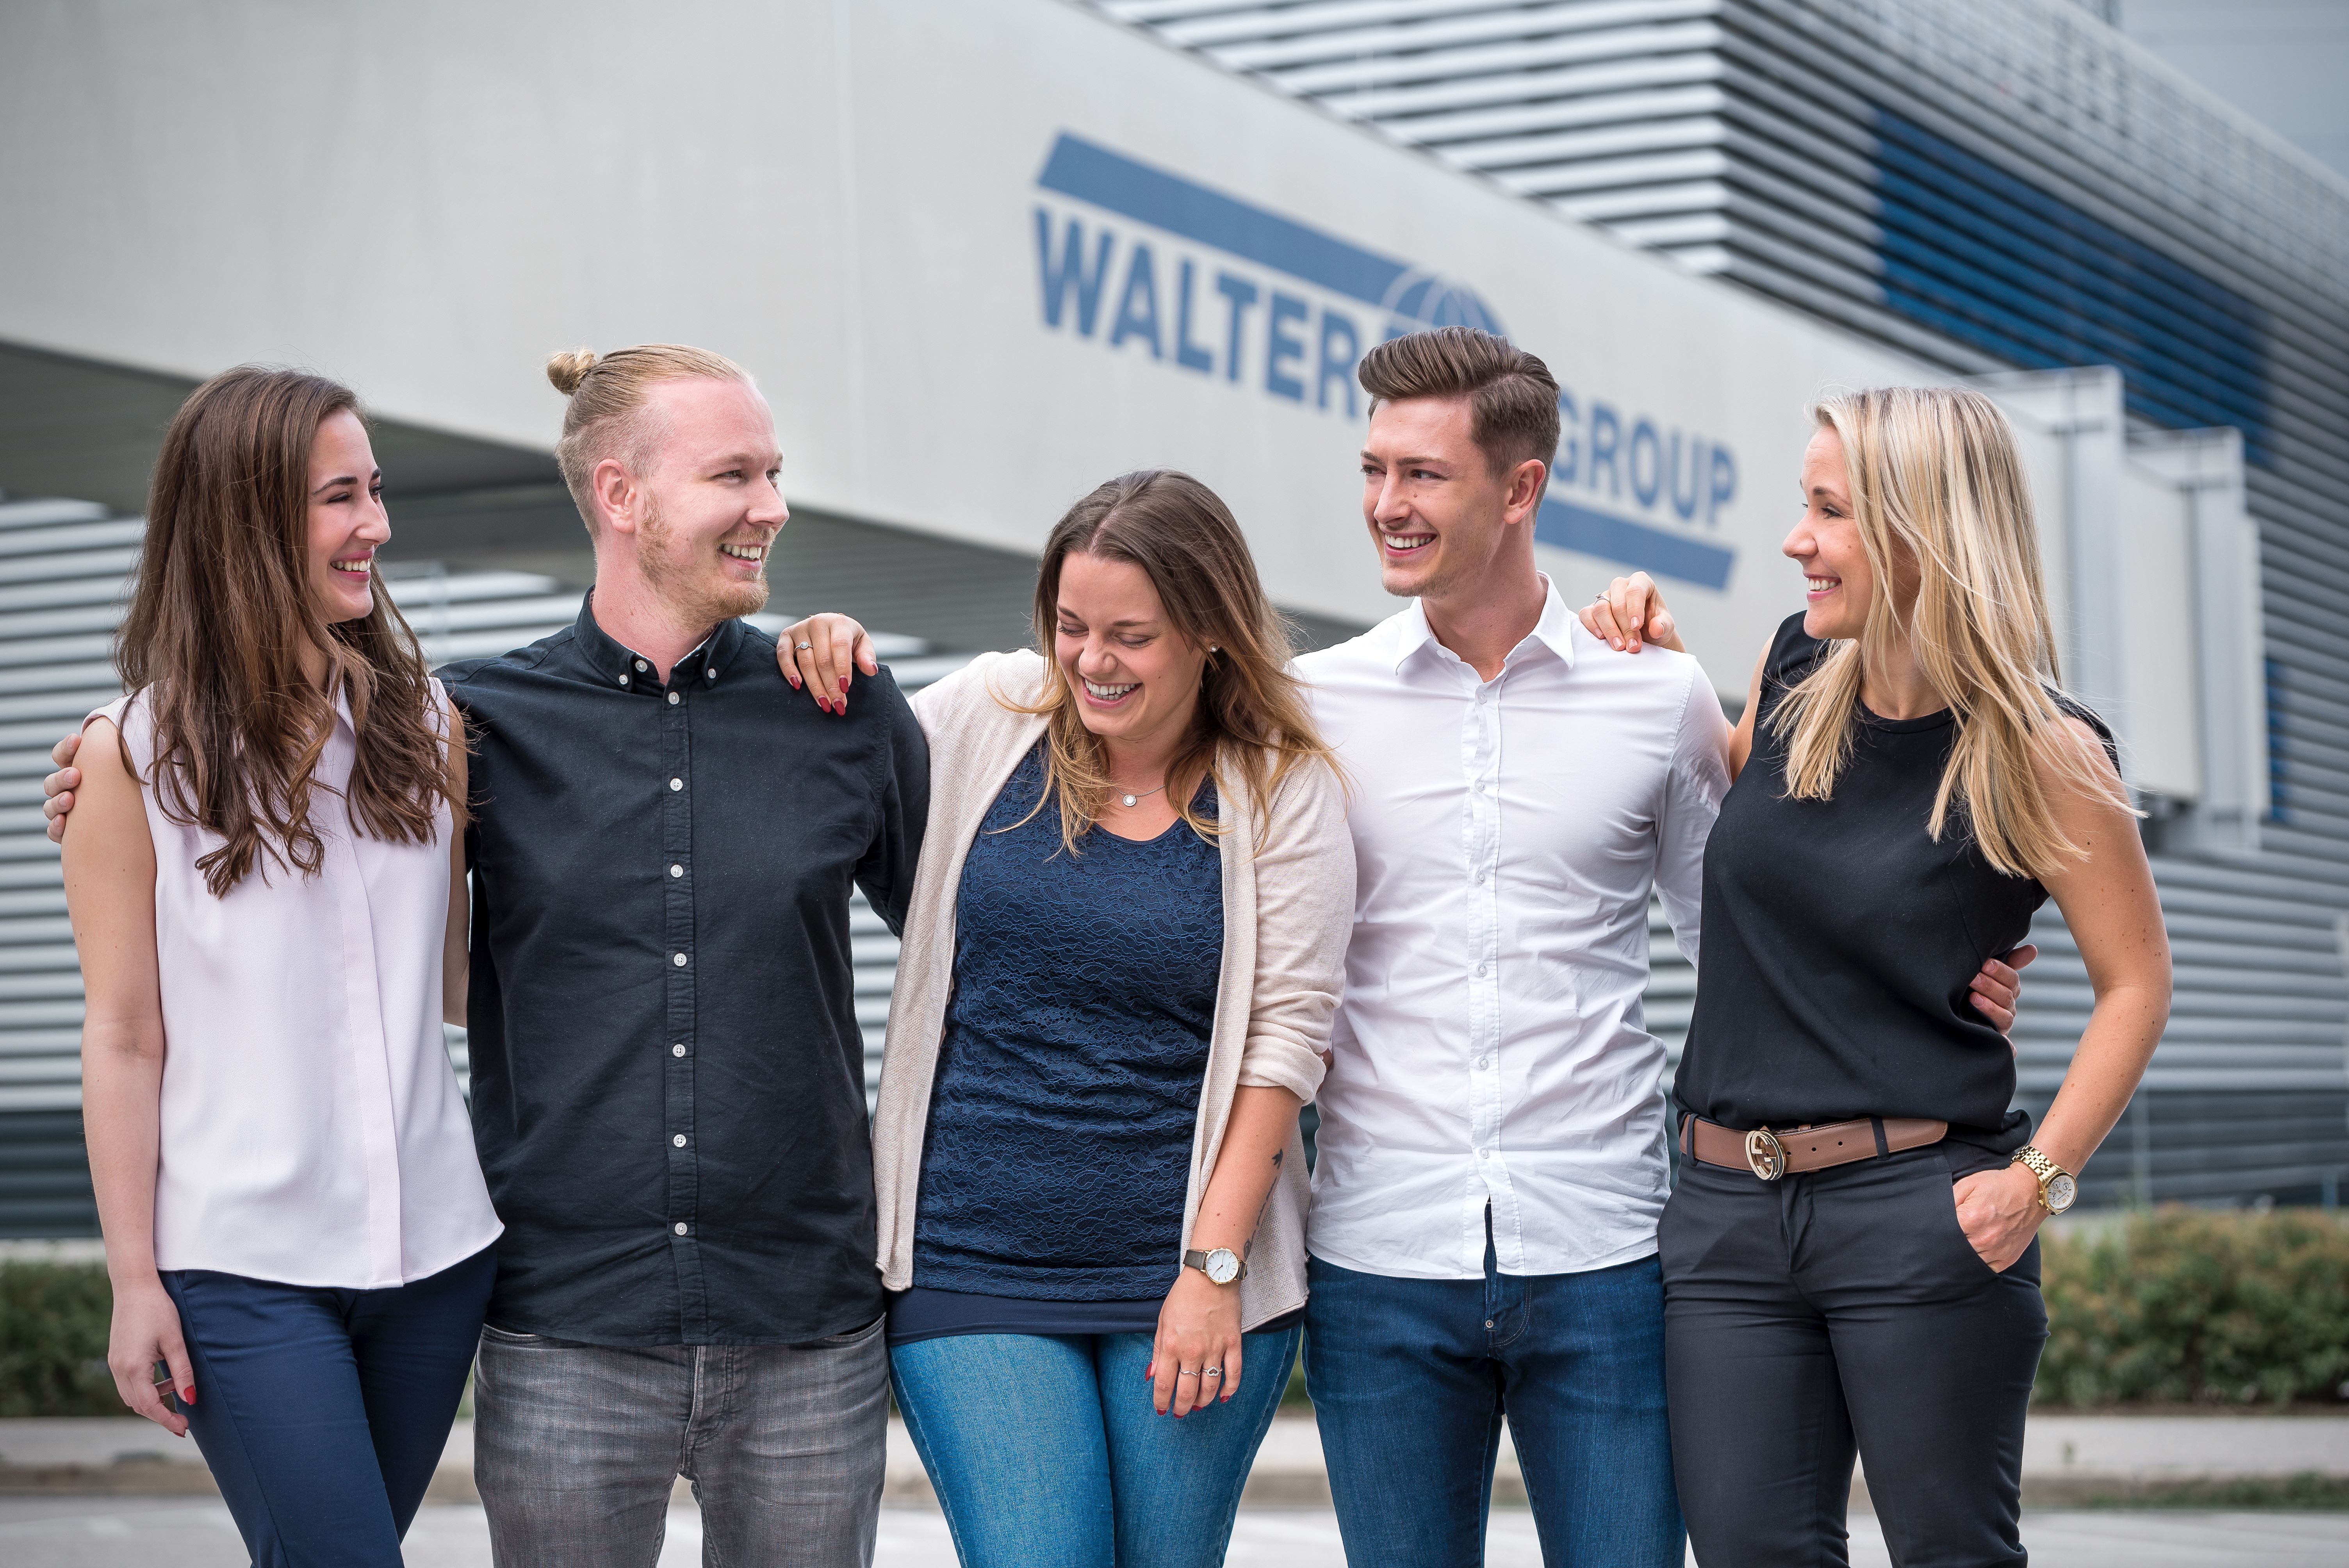 CONTAINEX Appartient au WALTER GROUP